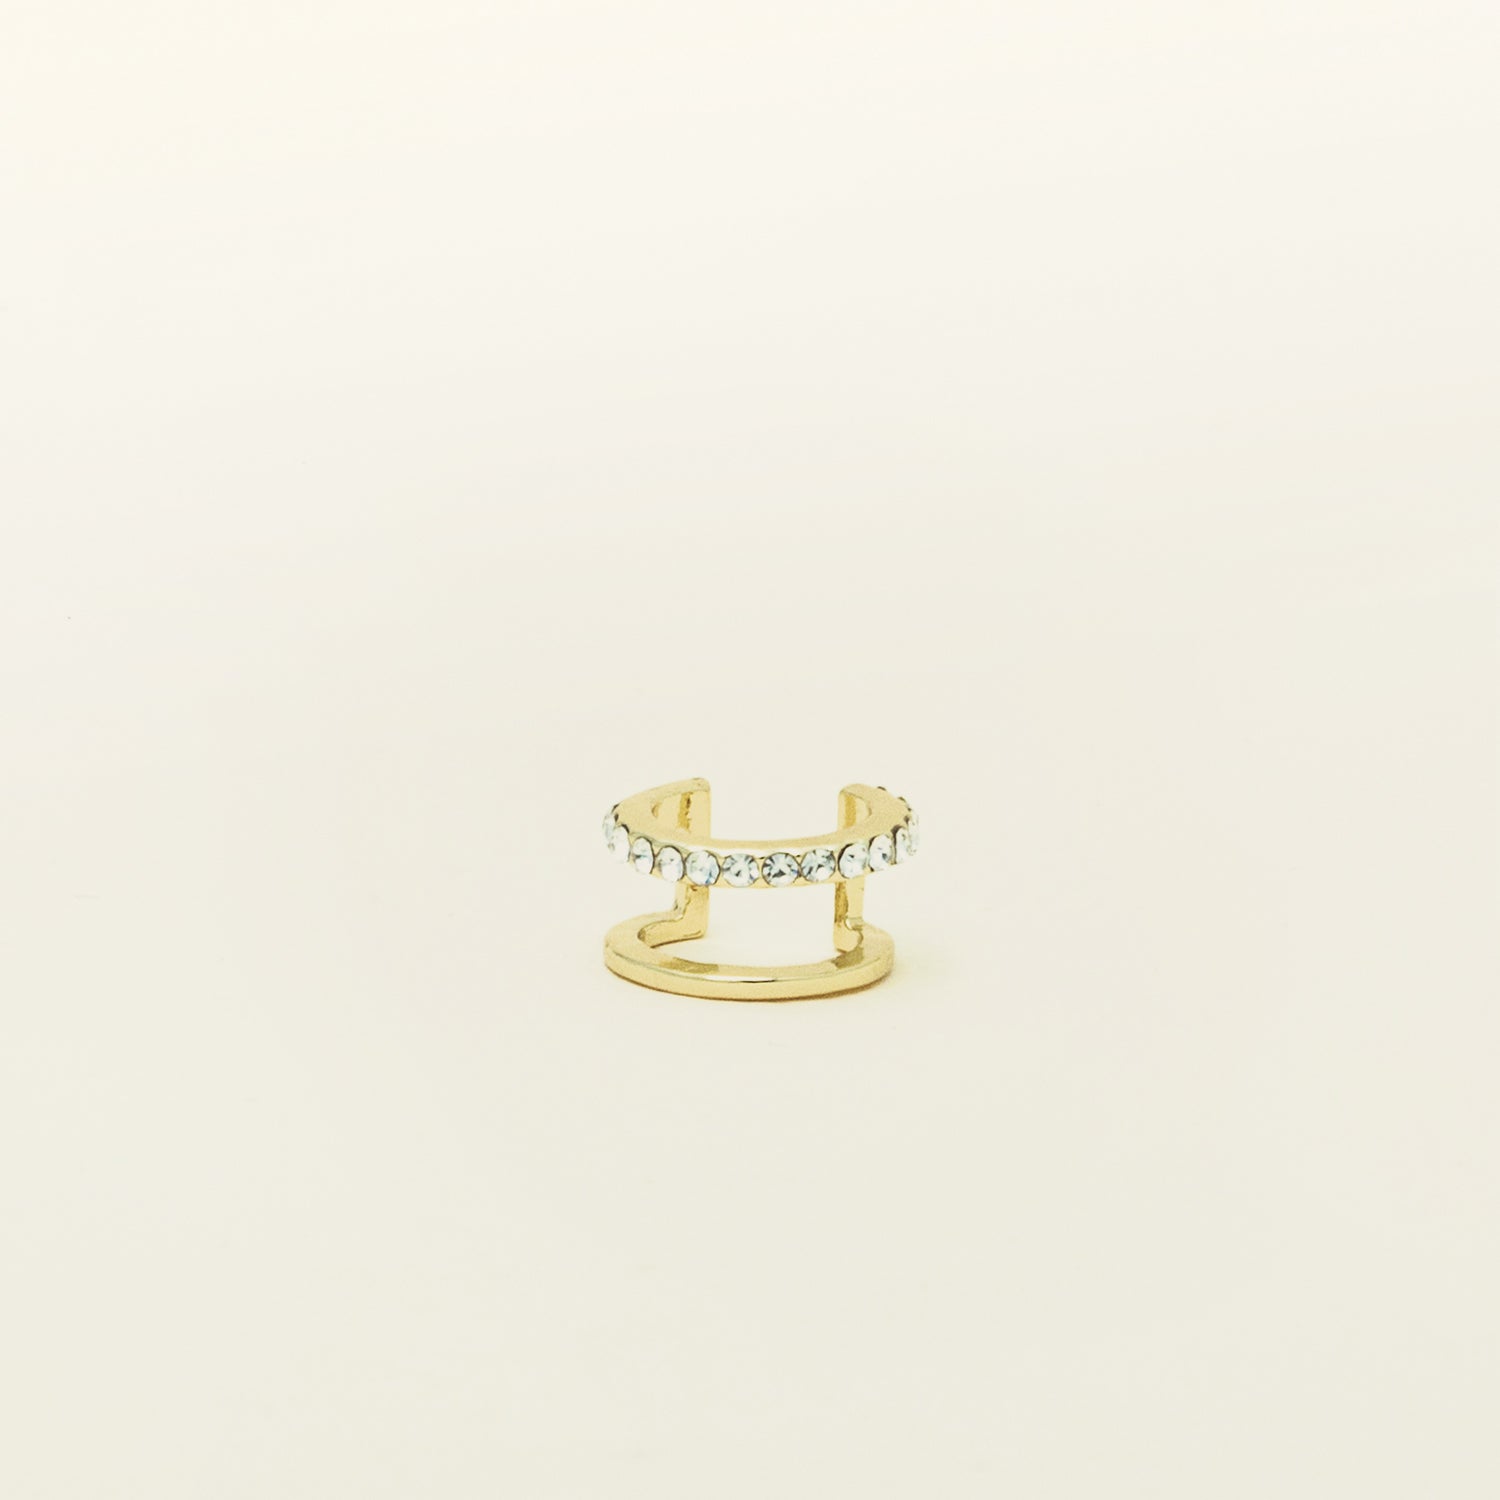 Image of a striking multi-band ear cuff, a contemporary fusion of gold-tone plated alloy and glistening strass. Expertly crafted to suit both men and women, this stylish accessory is intended to be worn along the conch of the ear, allowing you to make a bold fashion statement with this eye-catching piece